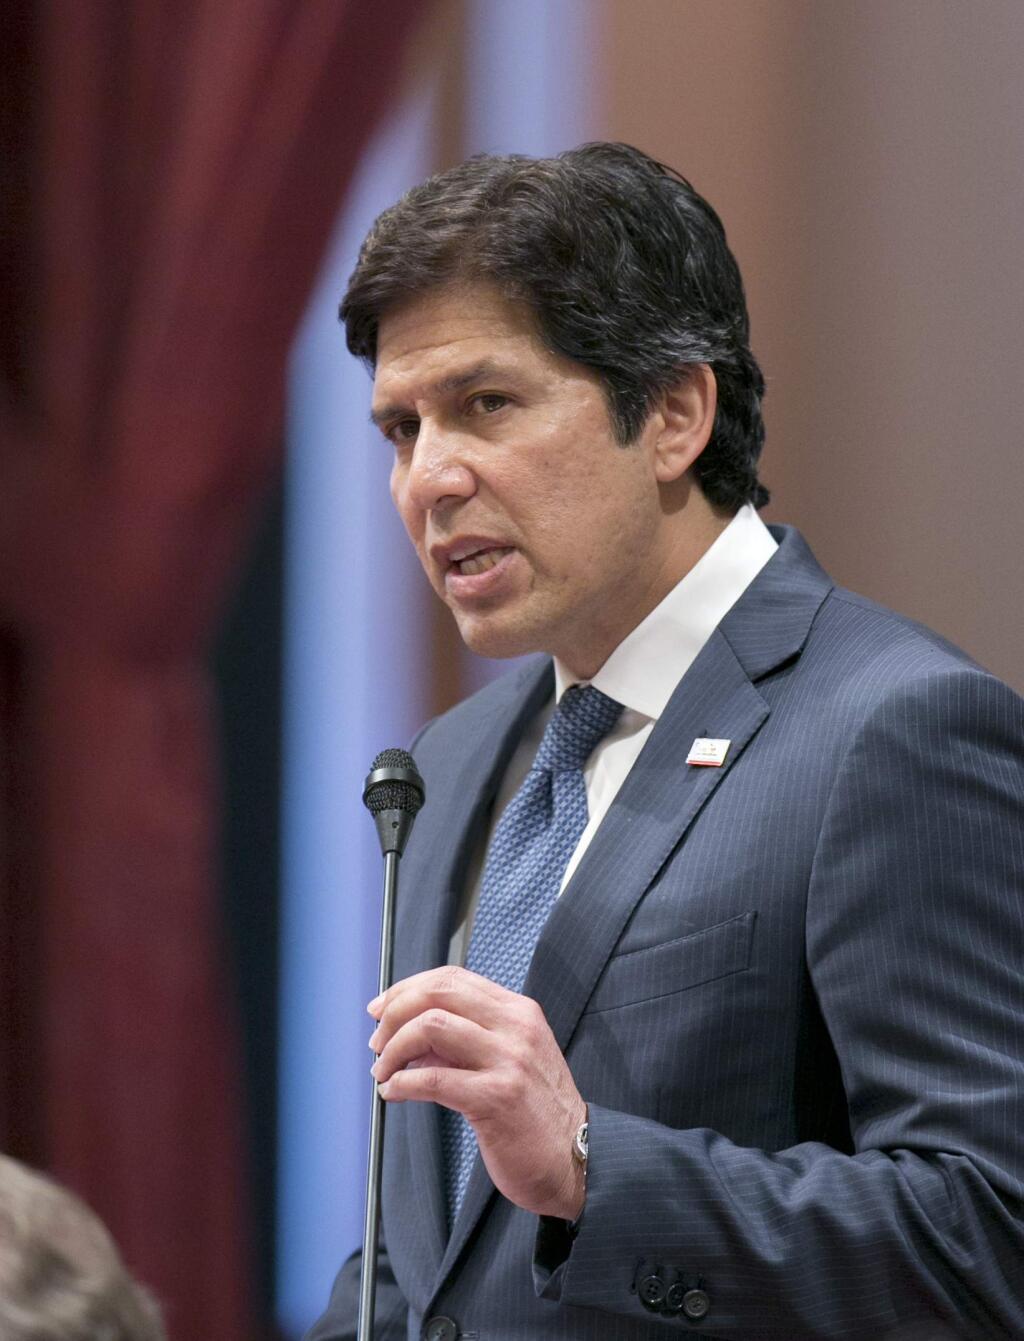 FILE -- In this Monday, July 17, 2017, file photo is Senate President Pro Tem Kevin de Leon, D-Los Angeles, in Sacramento, Calif. A sexual harassment investigation into a sitting California senator is putting a fresh spotlight on the legislative leader who is running for a U.S. senate seat. De Leon heads the committee in charge of overseeing workplace complaints and shares a house with Sen. Tony Mendoza, the lawmaker accused of misconduct. De Leon is also in the middle of a campaign to unseat U.S. Sen. Dianne Feinstein, the first woman California sent to the Senate. (AP Photo/Rich Pedroncelli,file)